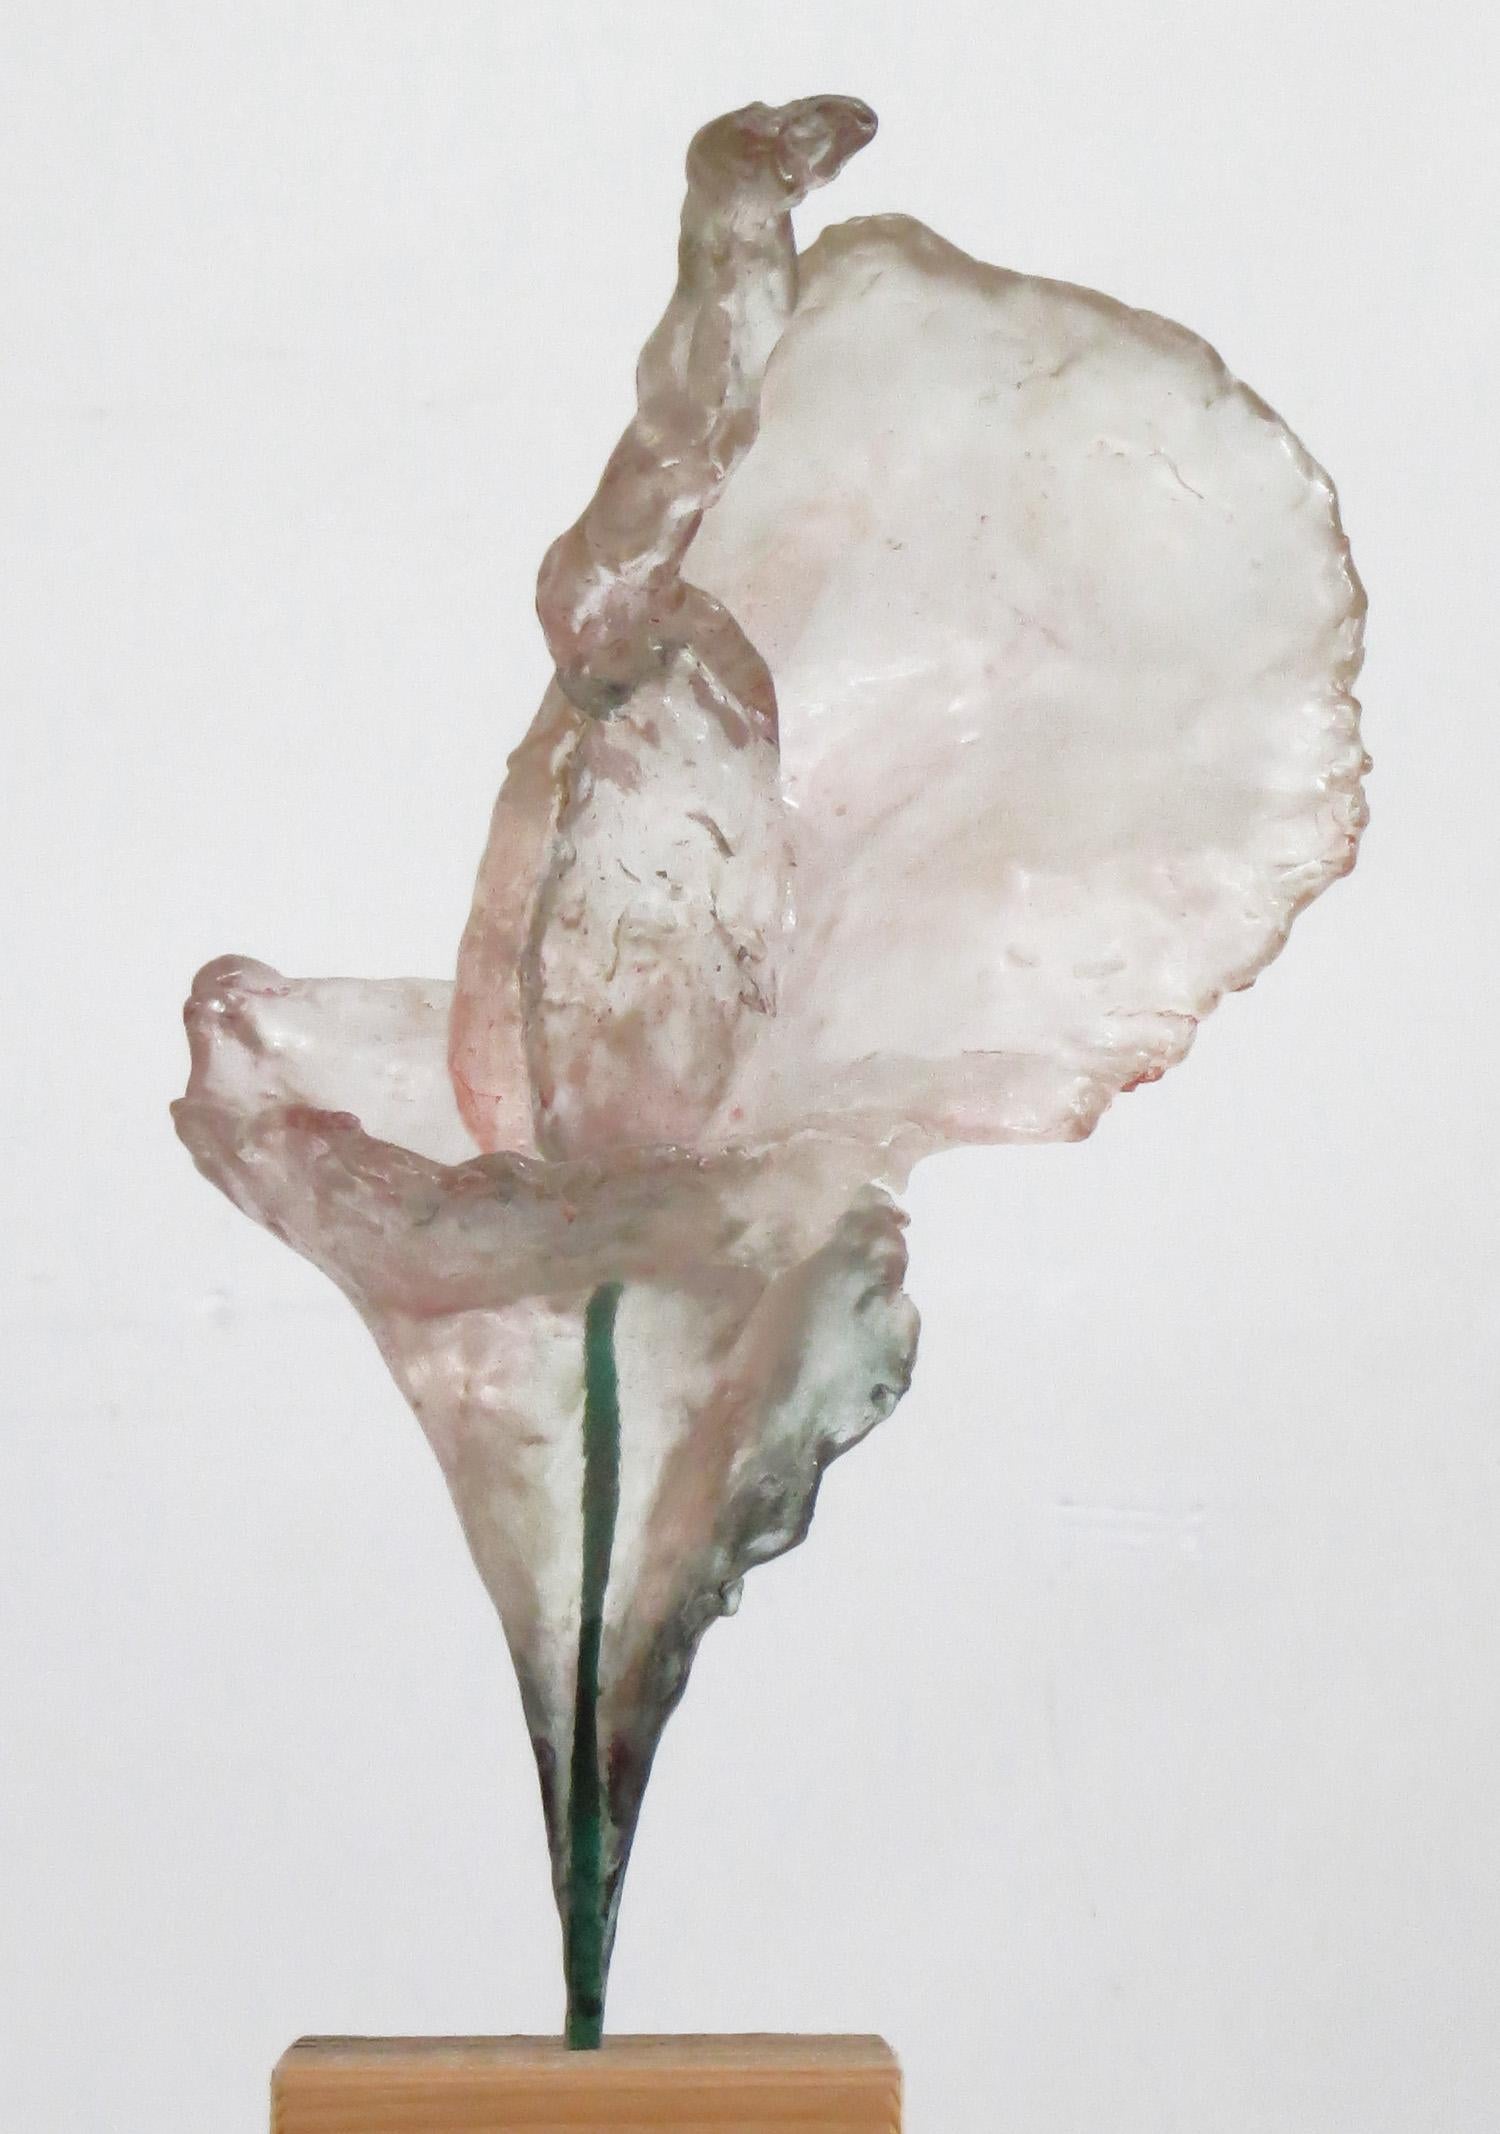 Howard Kalish Abstract Sculpture - "Shell Dance 15 (Lily)", transparent blossom shimmers in palest pink and green